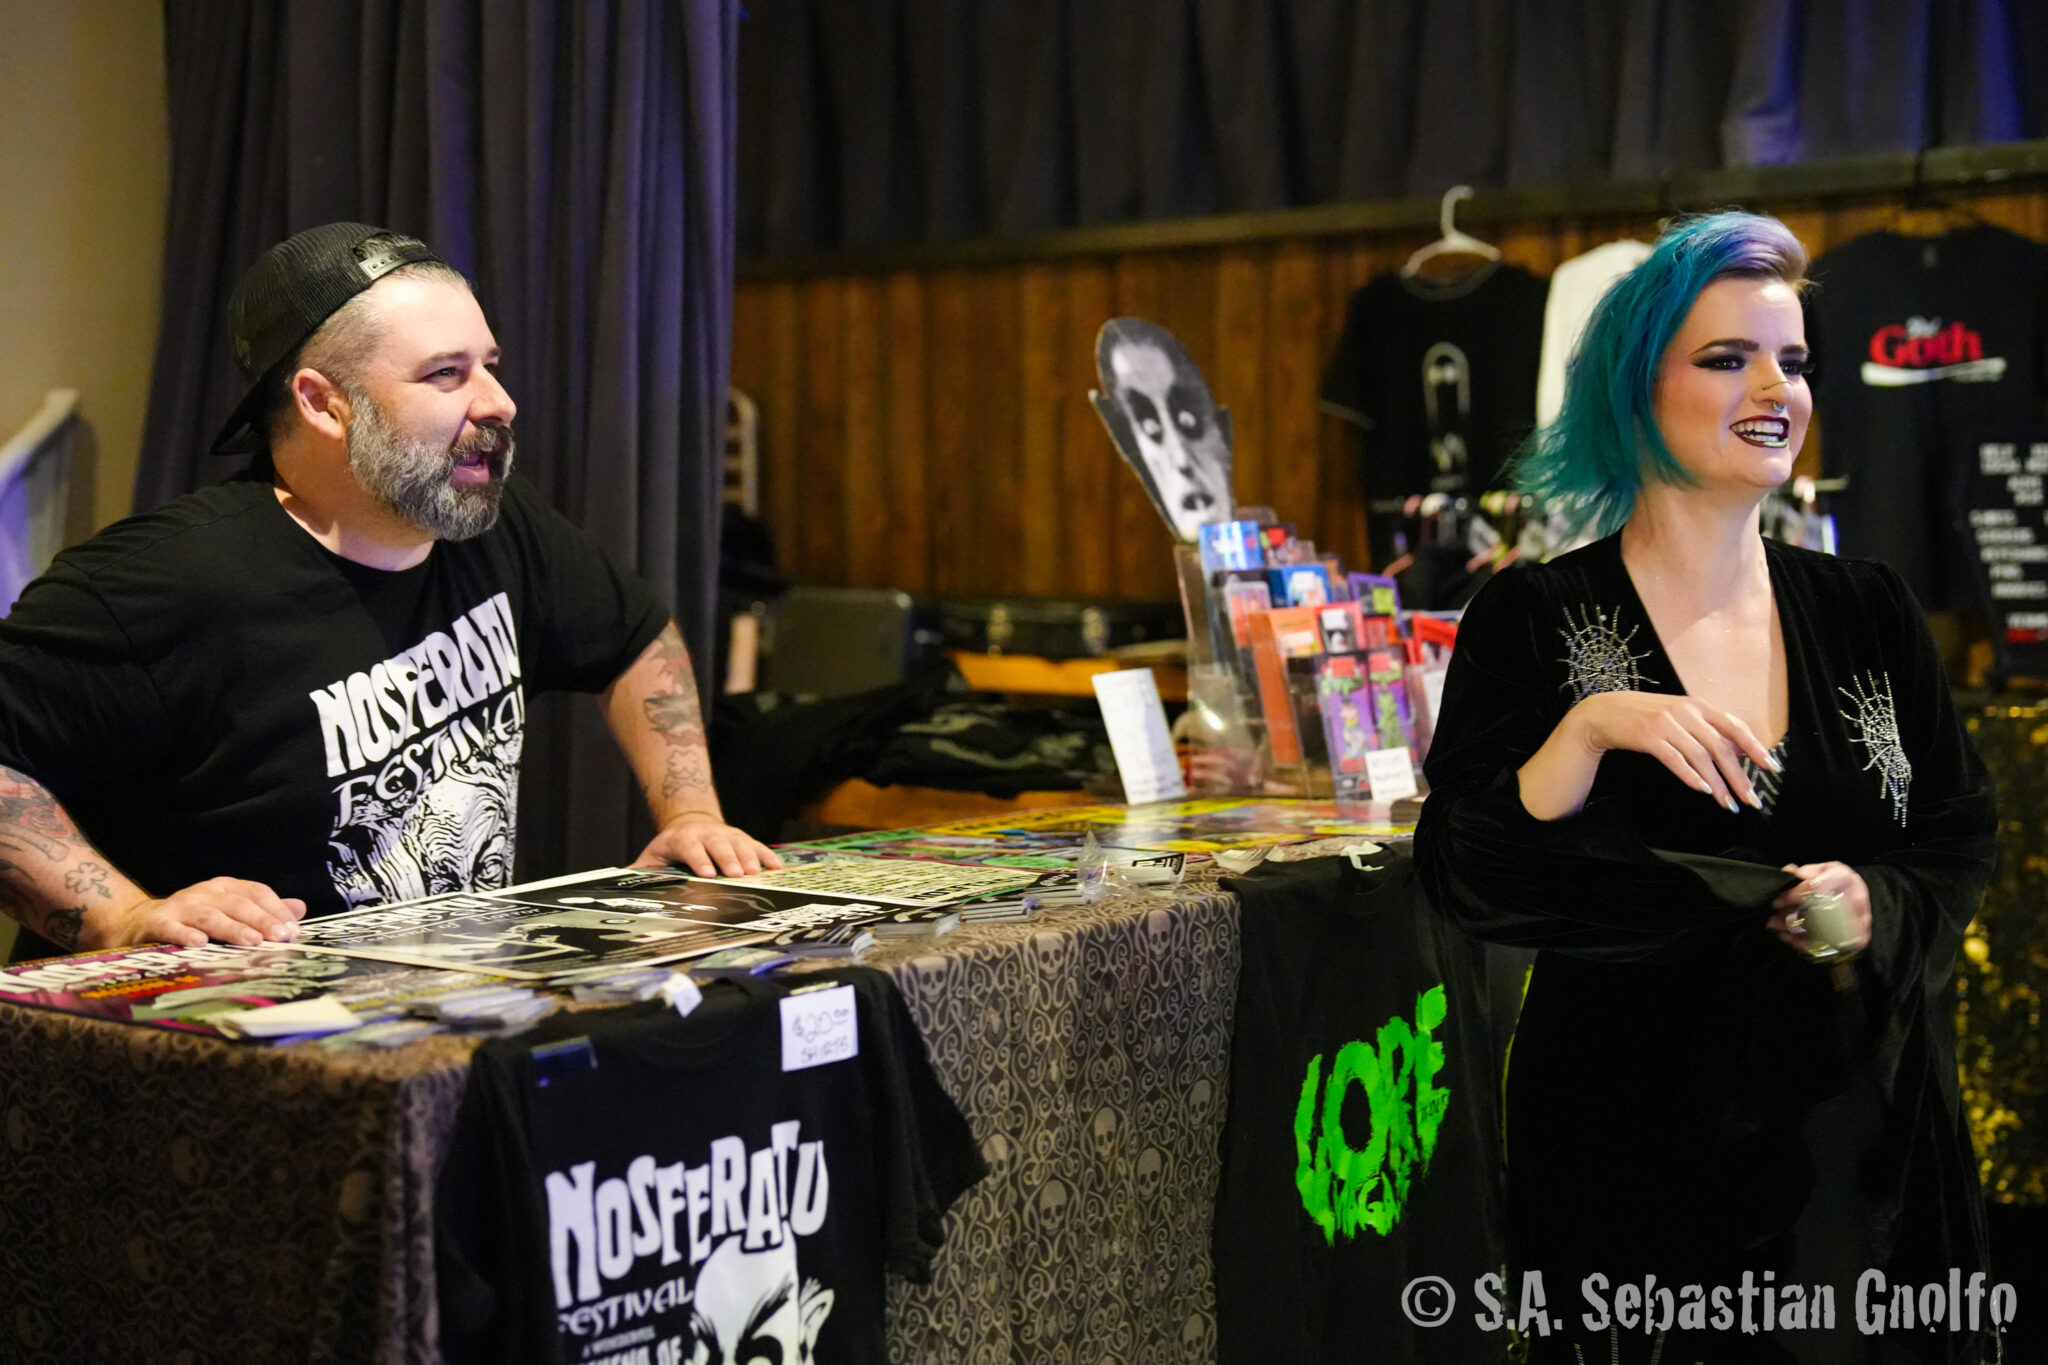 Festival founder Mitch Rafter of Gore Noir Magazine with Vivienne Vermouth